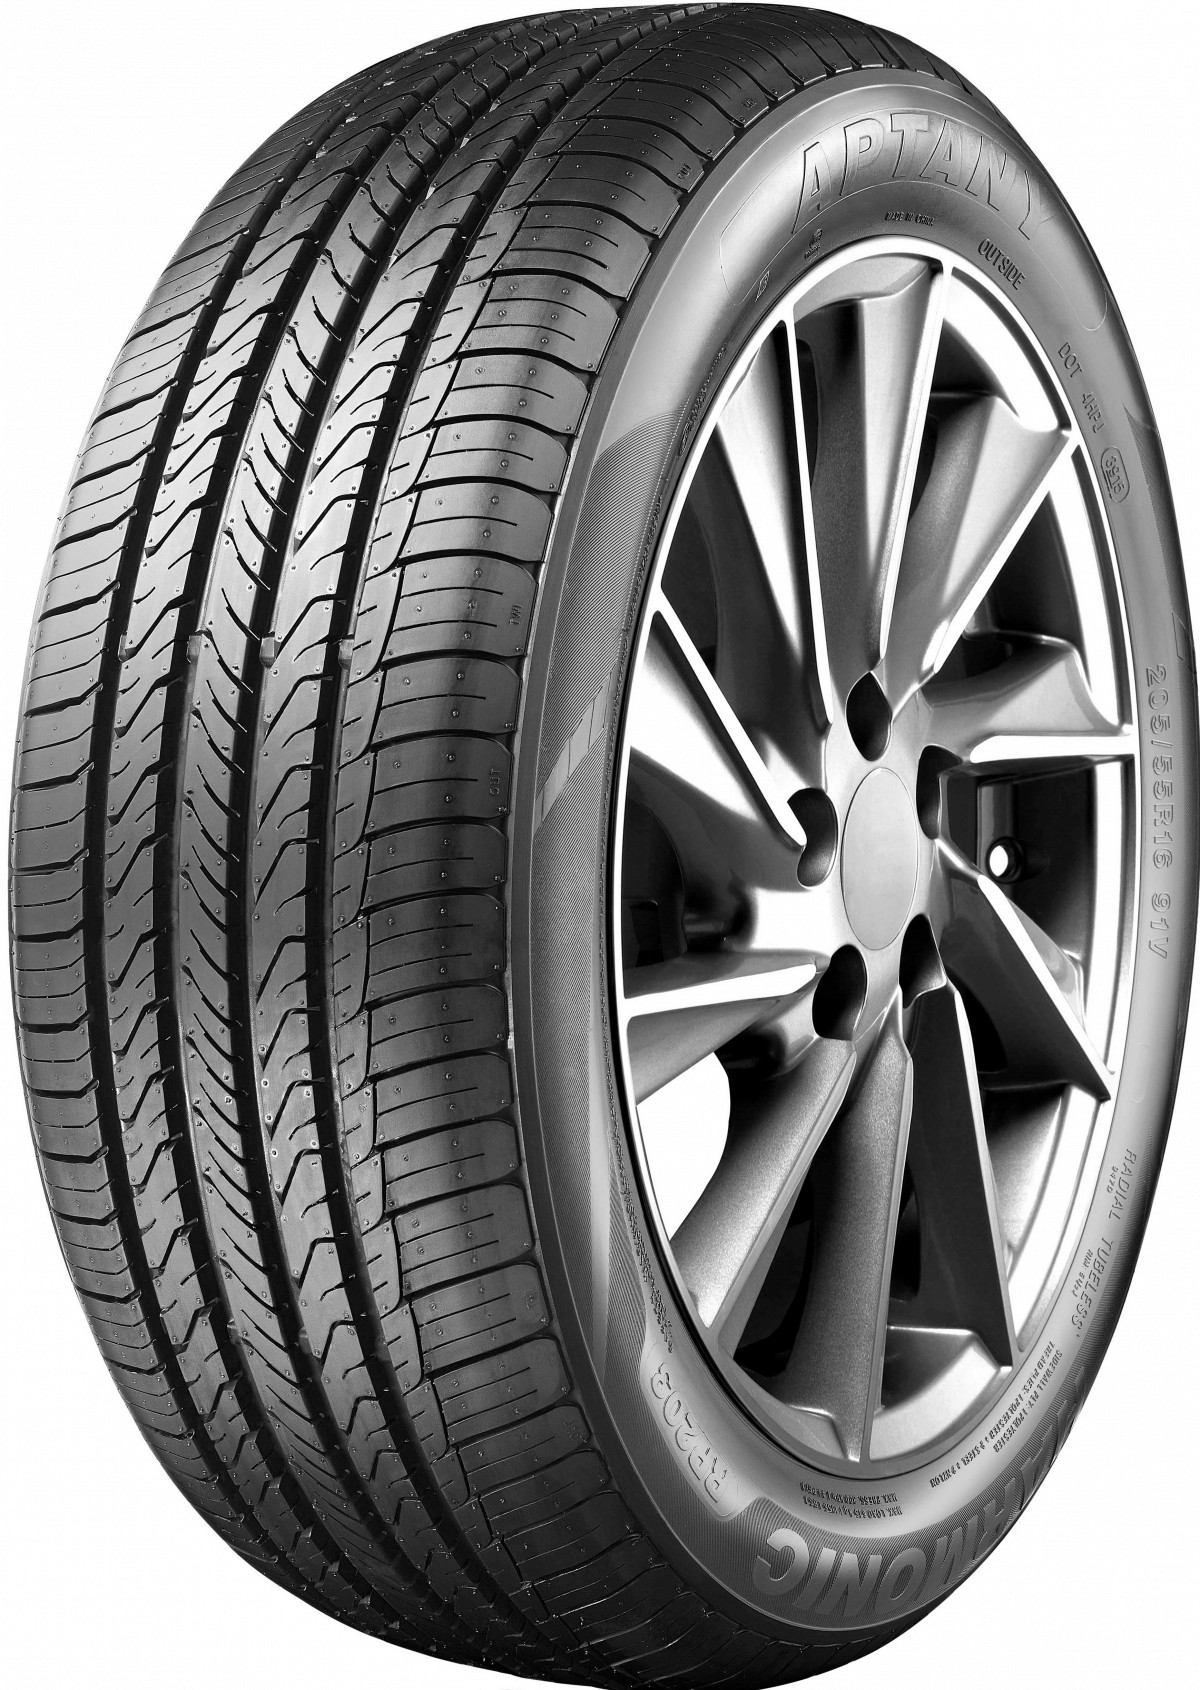 Aptany RP203 Gomme 185/60/R15 84H 4604